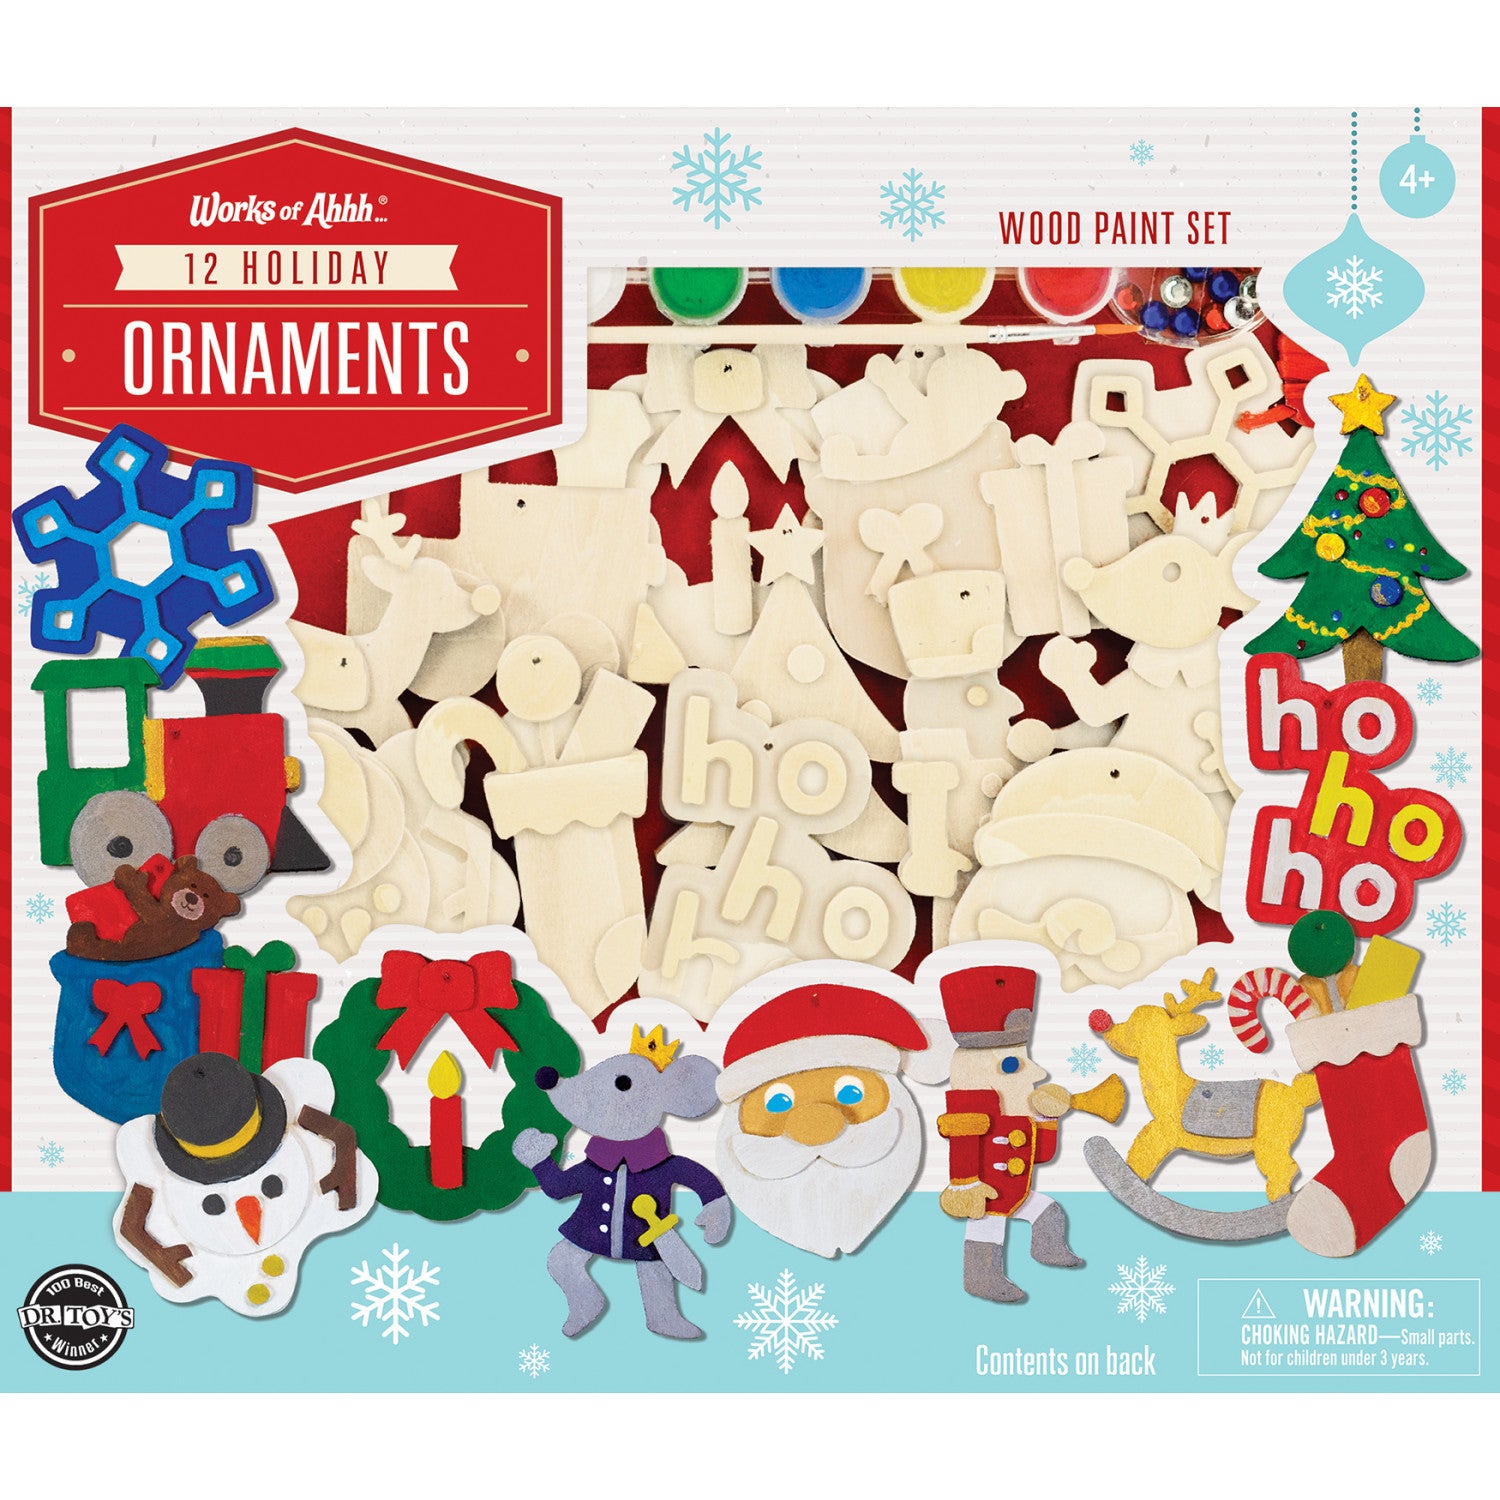 Works of Ahhh Holiday Christmas Ornaments 12 Pack Wood Paint Kit